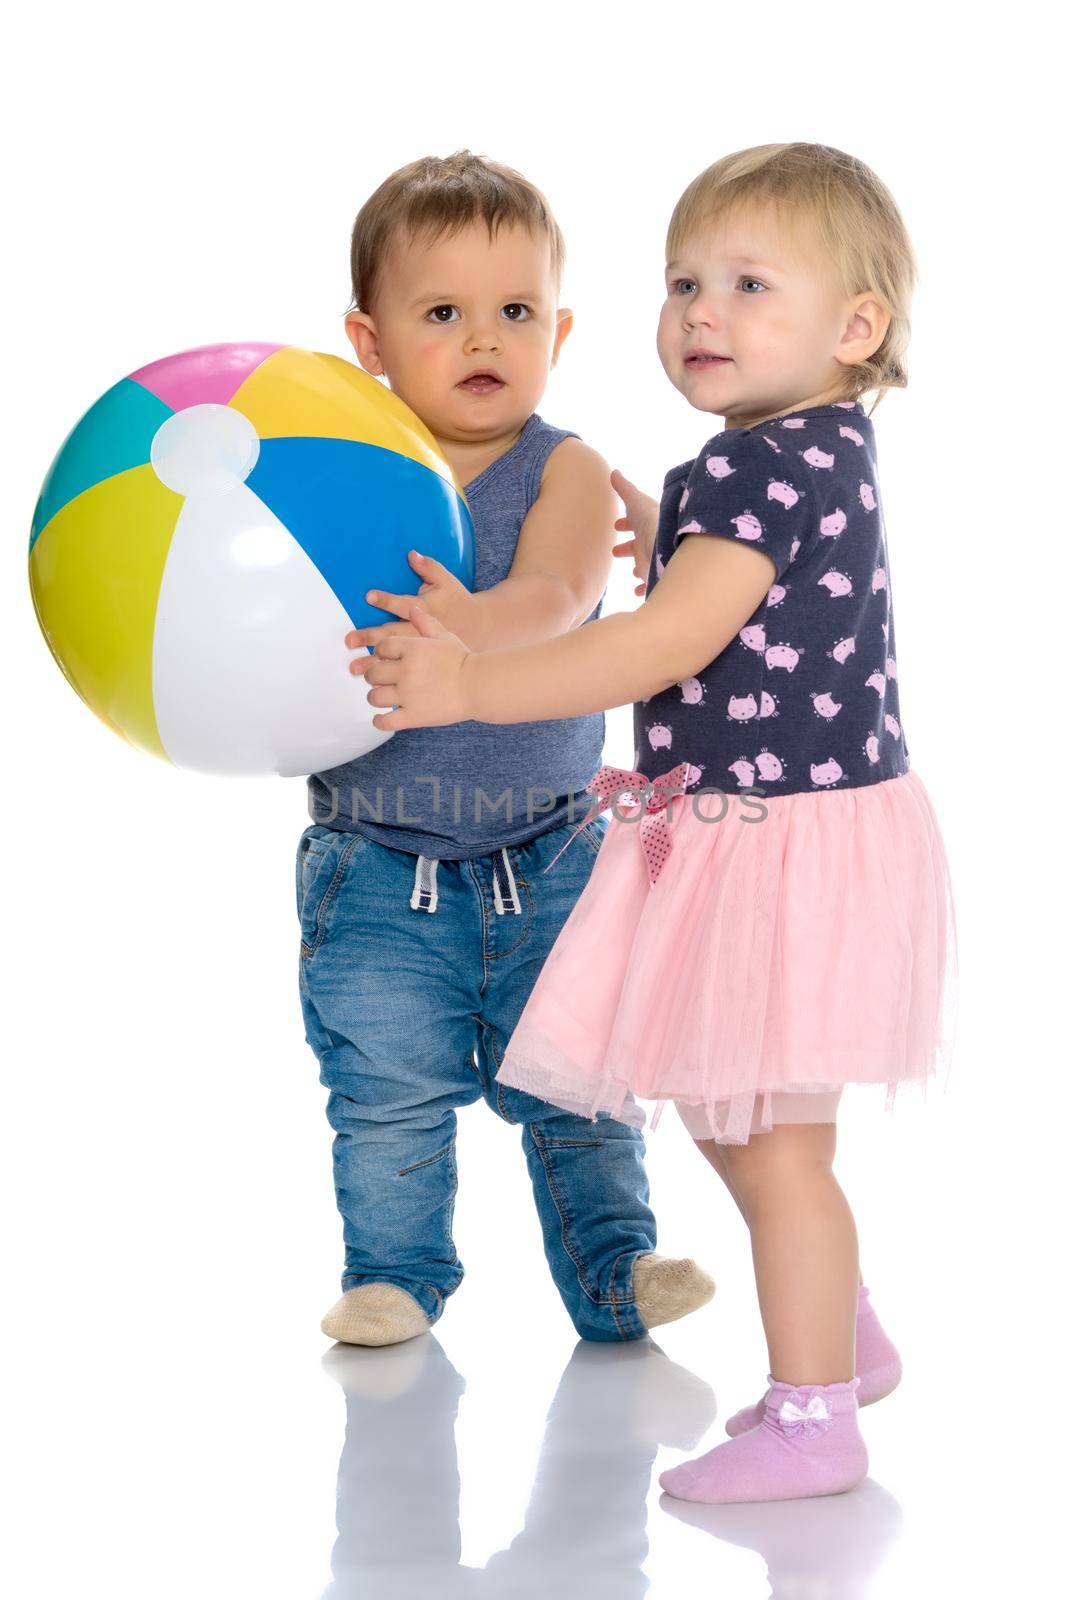 Toddler boy and girl playing with ball. by kolesnikov_studio